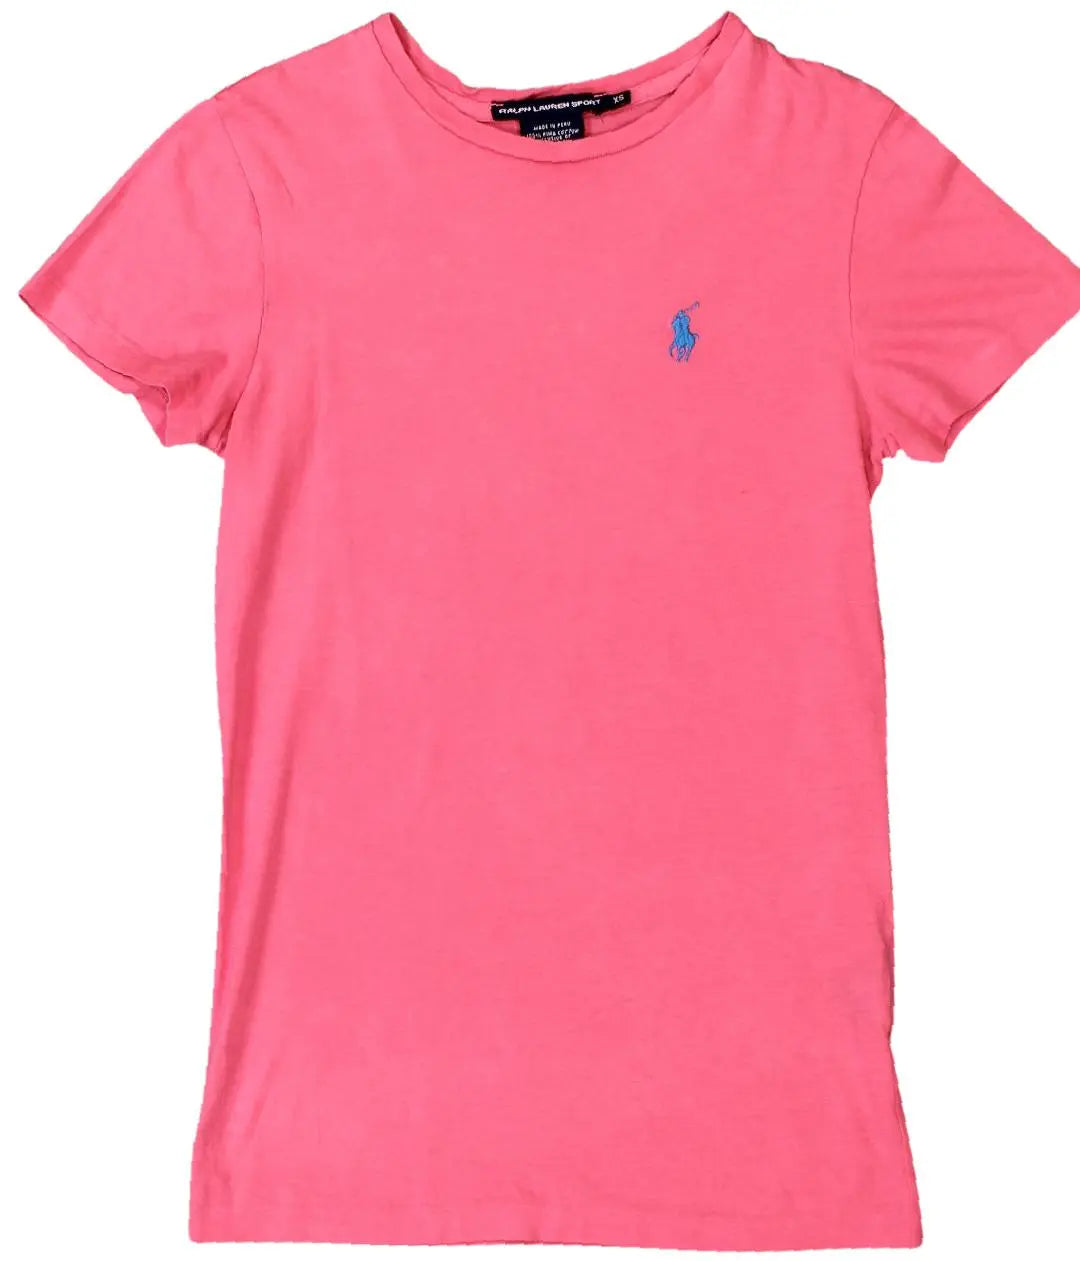 Ralph Lauren - PINK4130- ThriftTale.com - Vintage and second handclothing